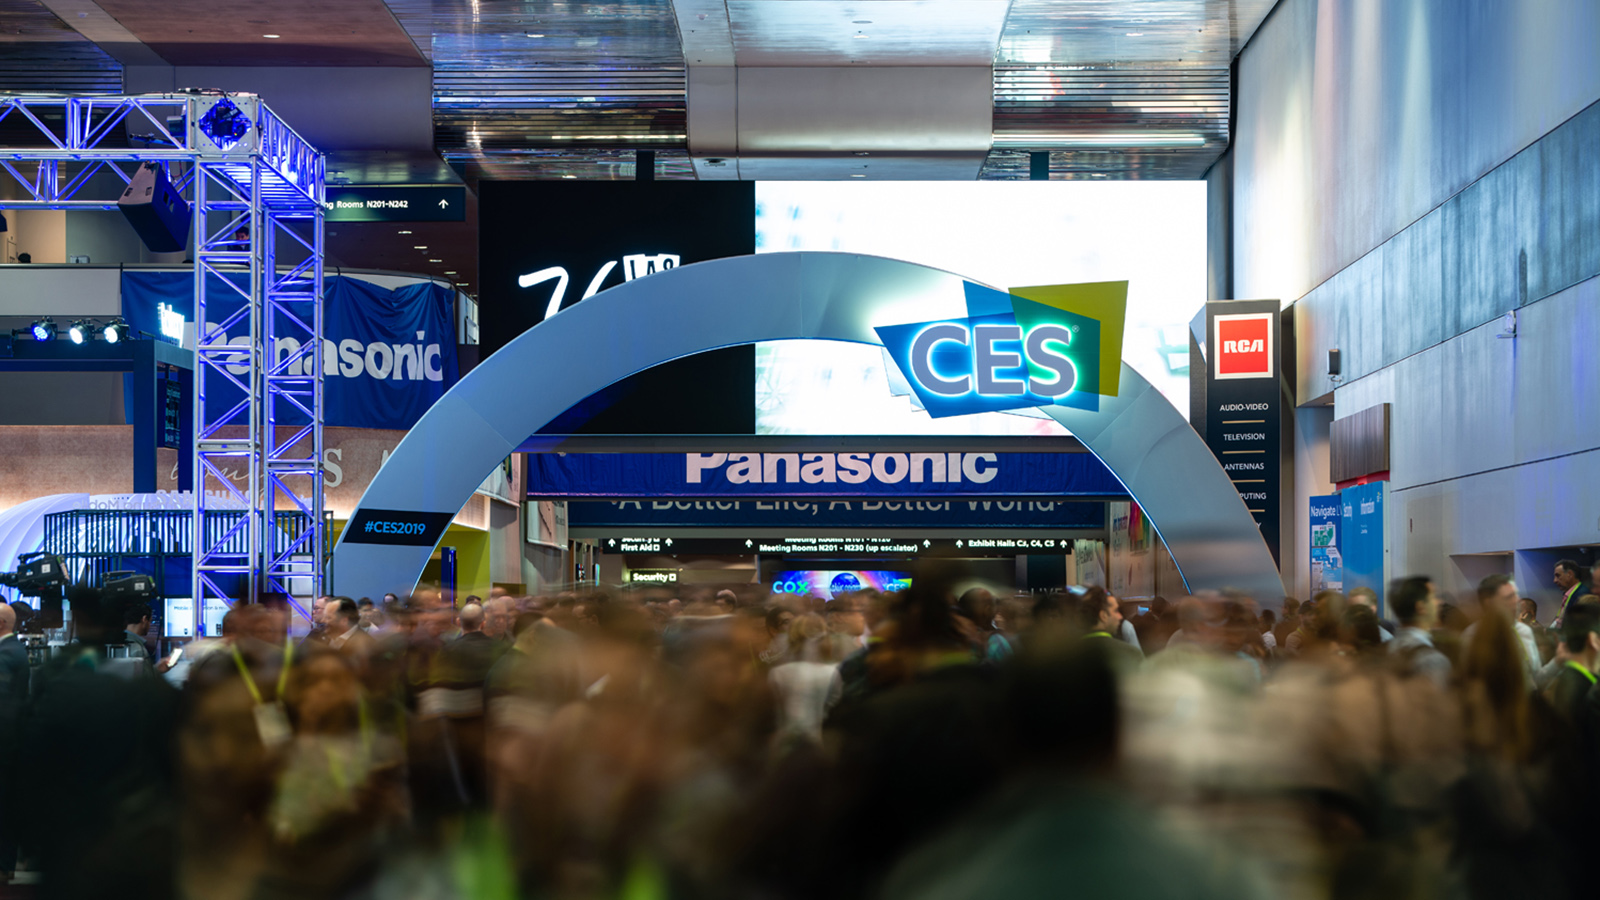 It's show time! AT&S will present at CES 2022 / CES|It's show time! AT&S will present at CES 2022